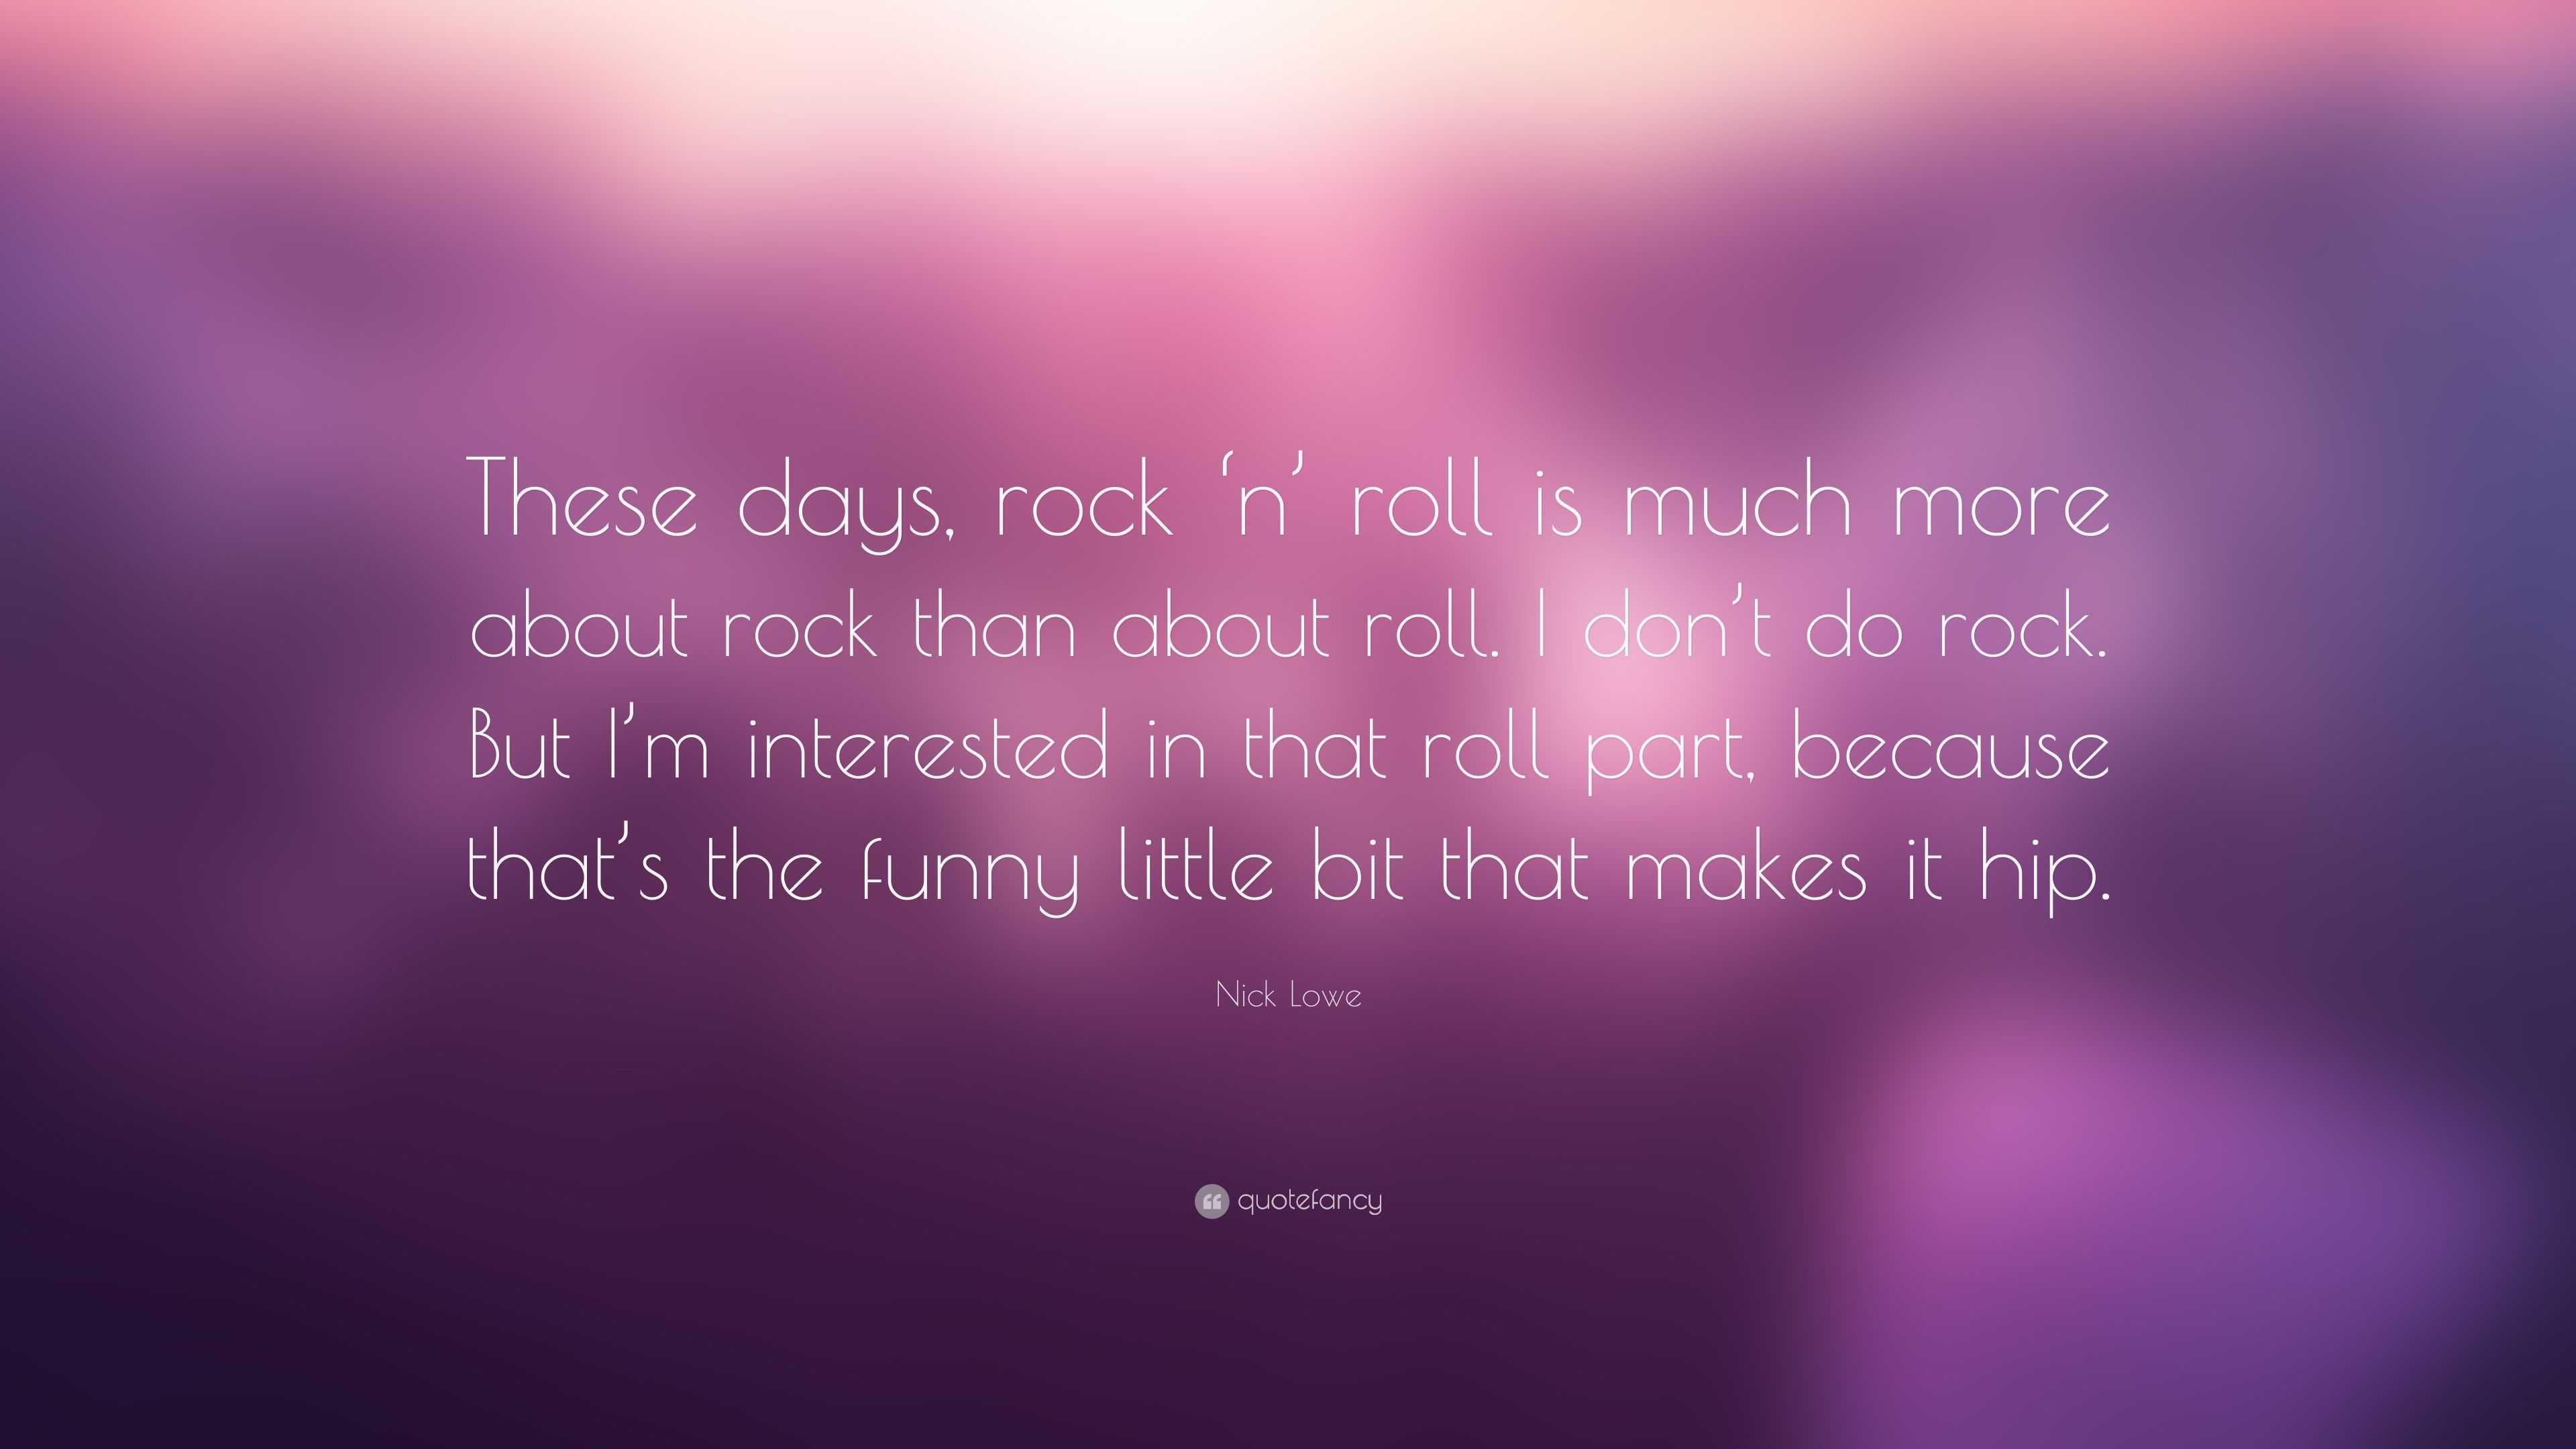 Nick Lowe Quote These Days Rock N Roll Is Much More About Rock Than About Roll I Don T Do Rock But I M Interested In That Roll Part